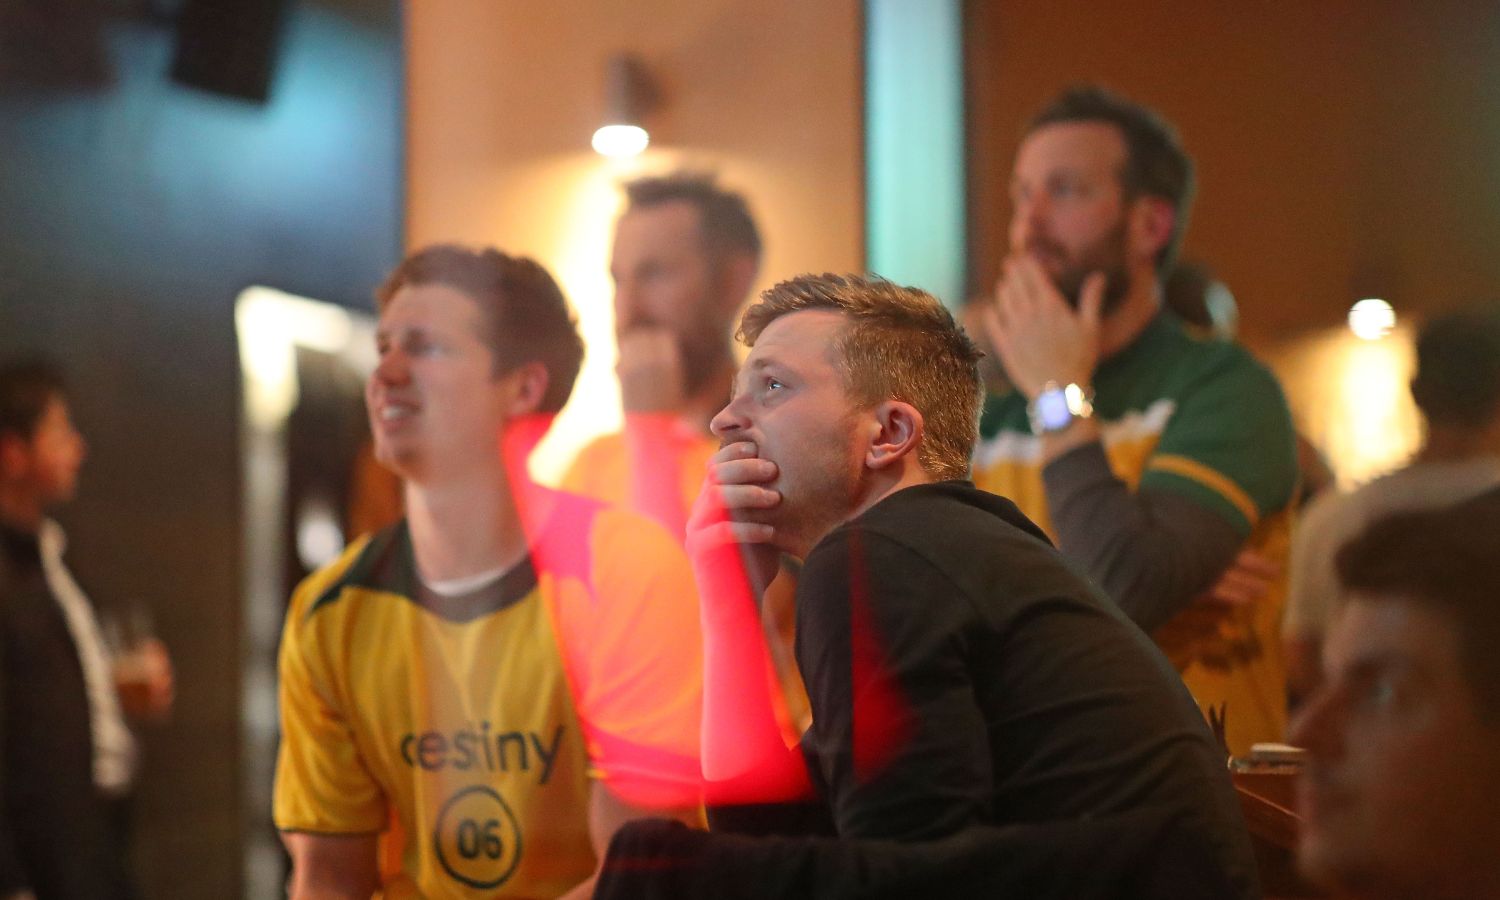 An image showing fans watching the 2023 FIFA womens world cup at a bar in Sydney